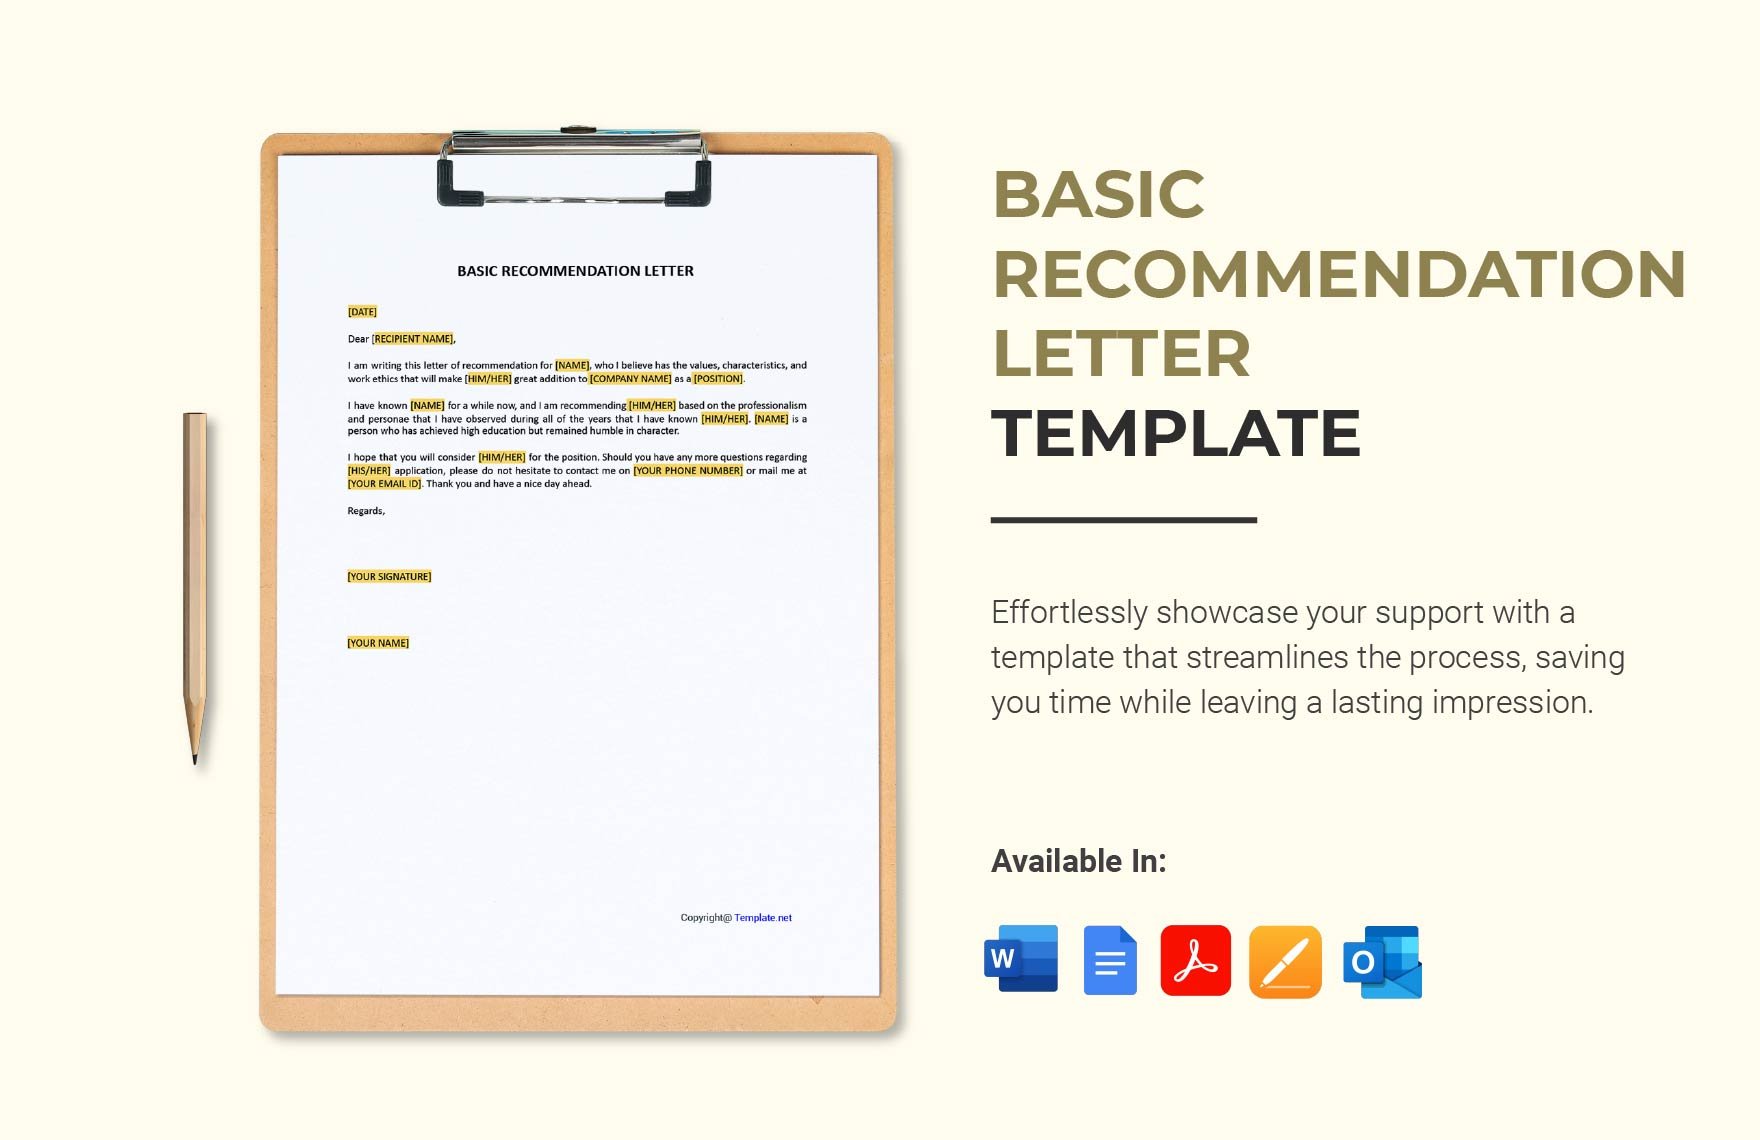 Basic Recommendation Letter Template